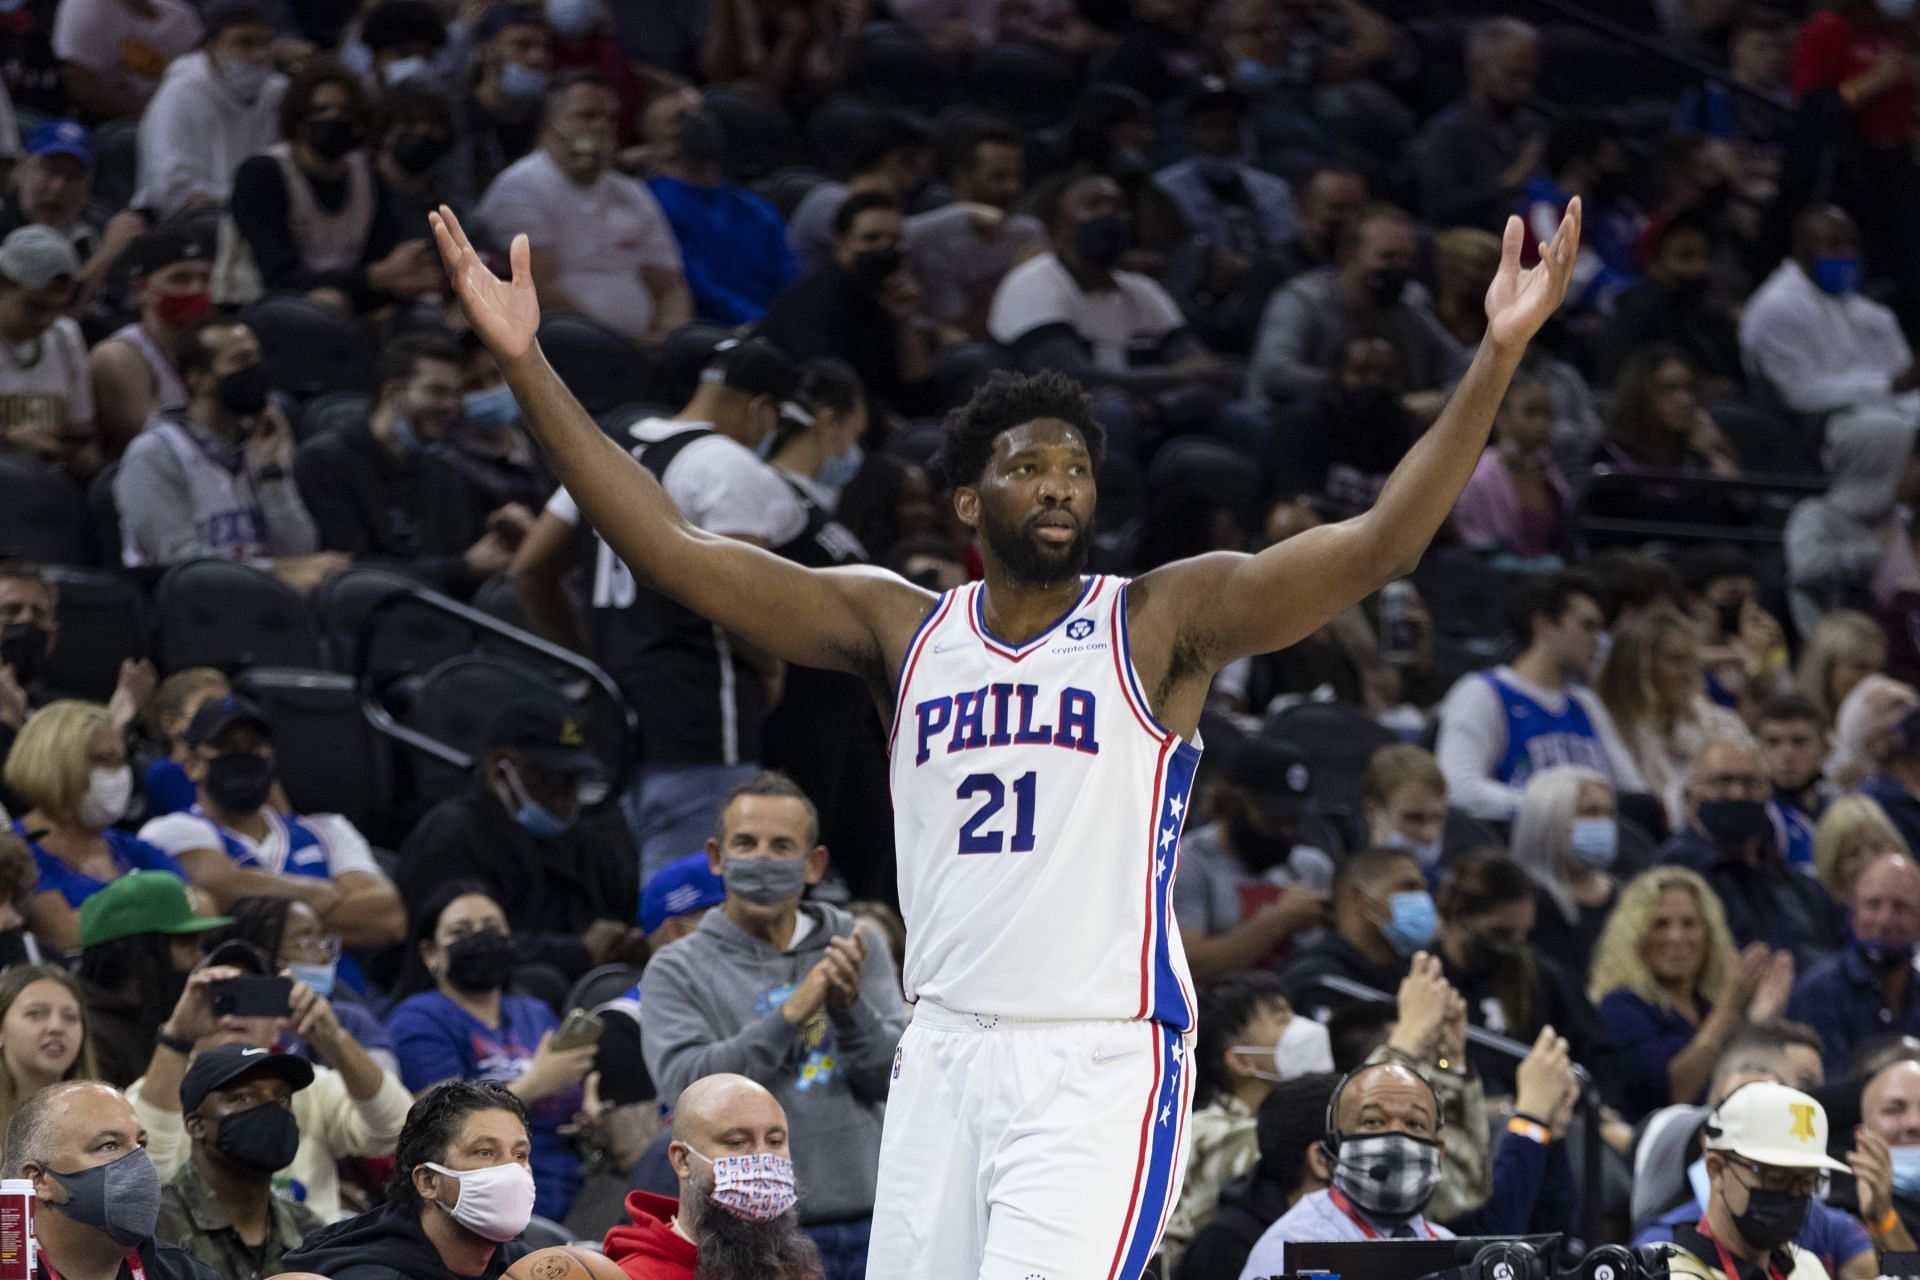 Joel Embiid appeals to the crowd at the Philadelphia 76ers game.